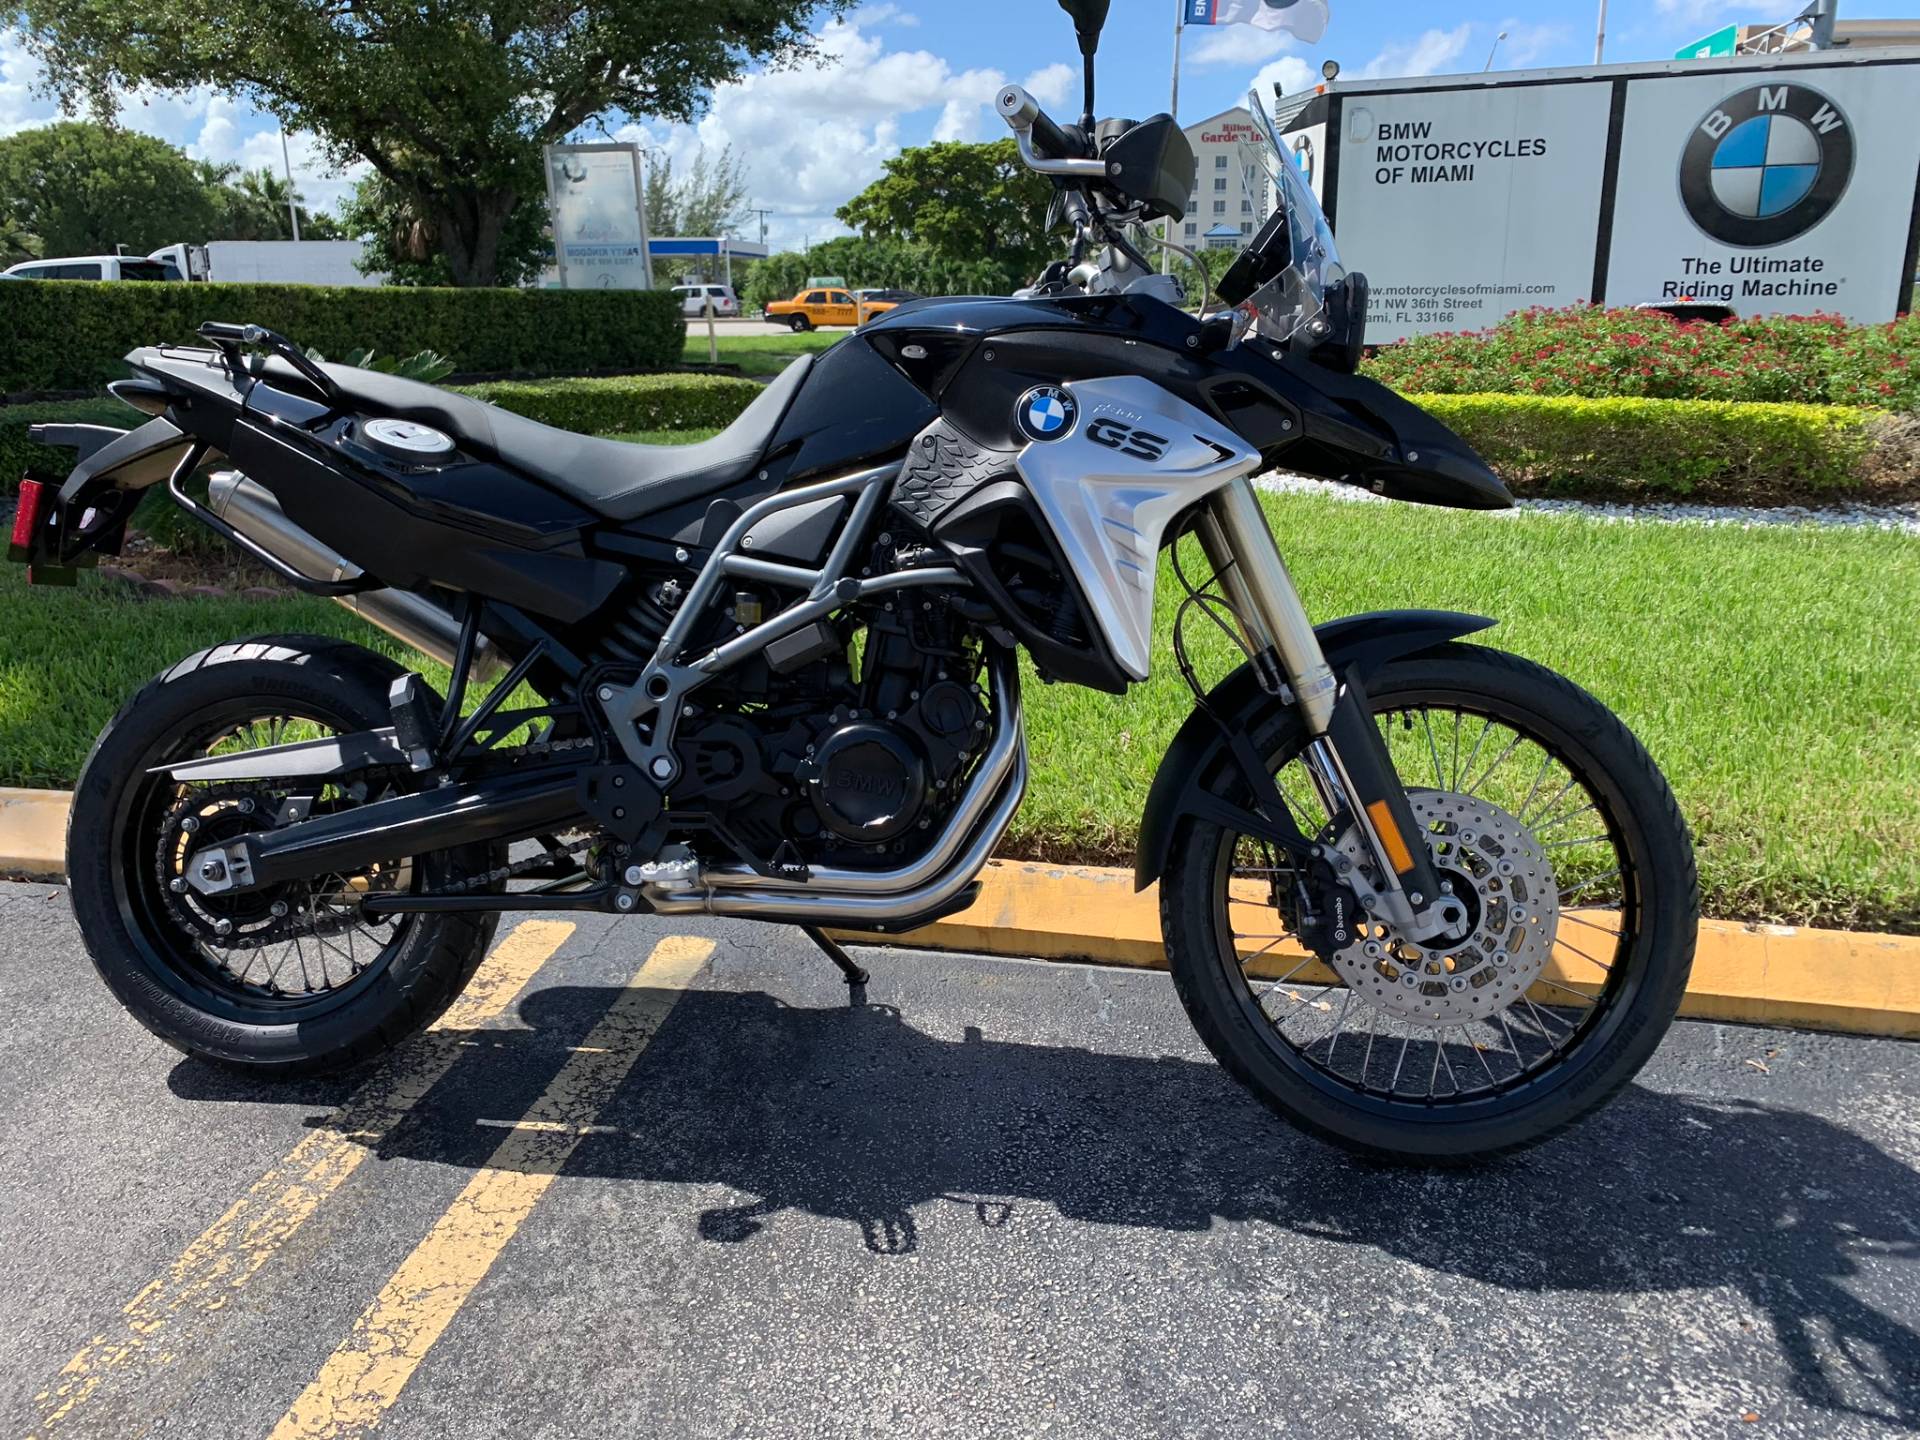 Used 2016 BMW F 800 GS Motorcycles in Miami, FL